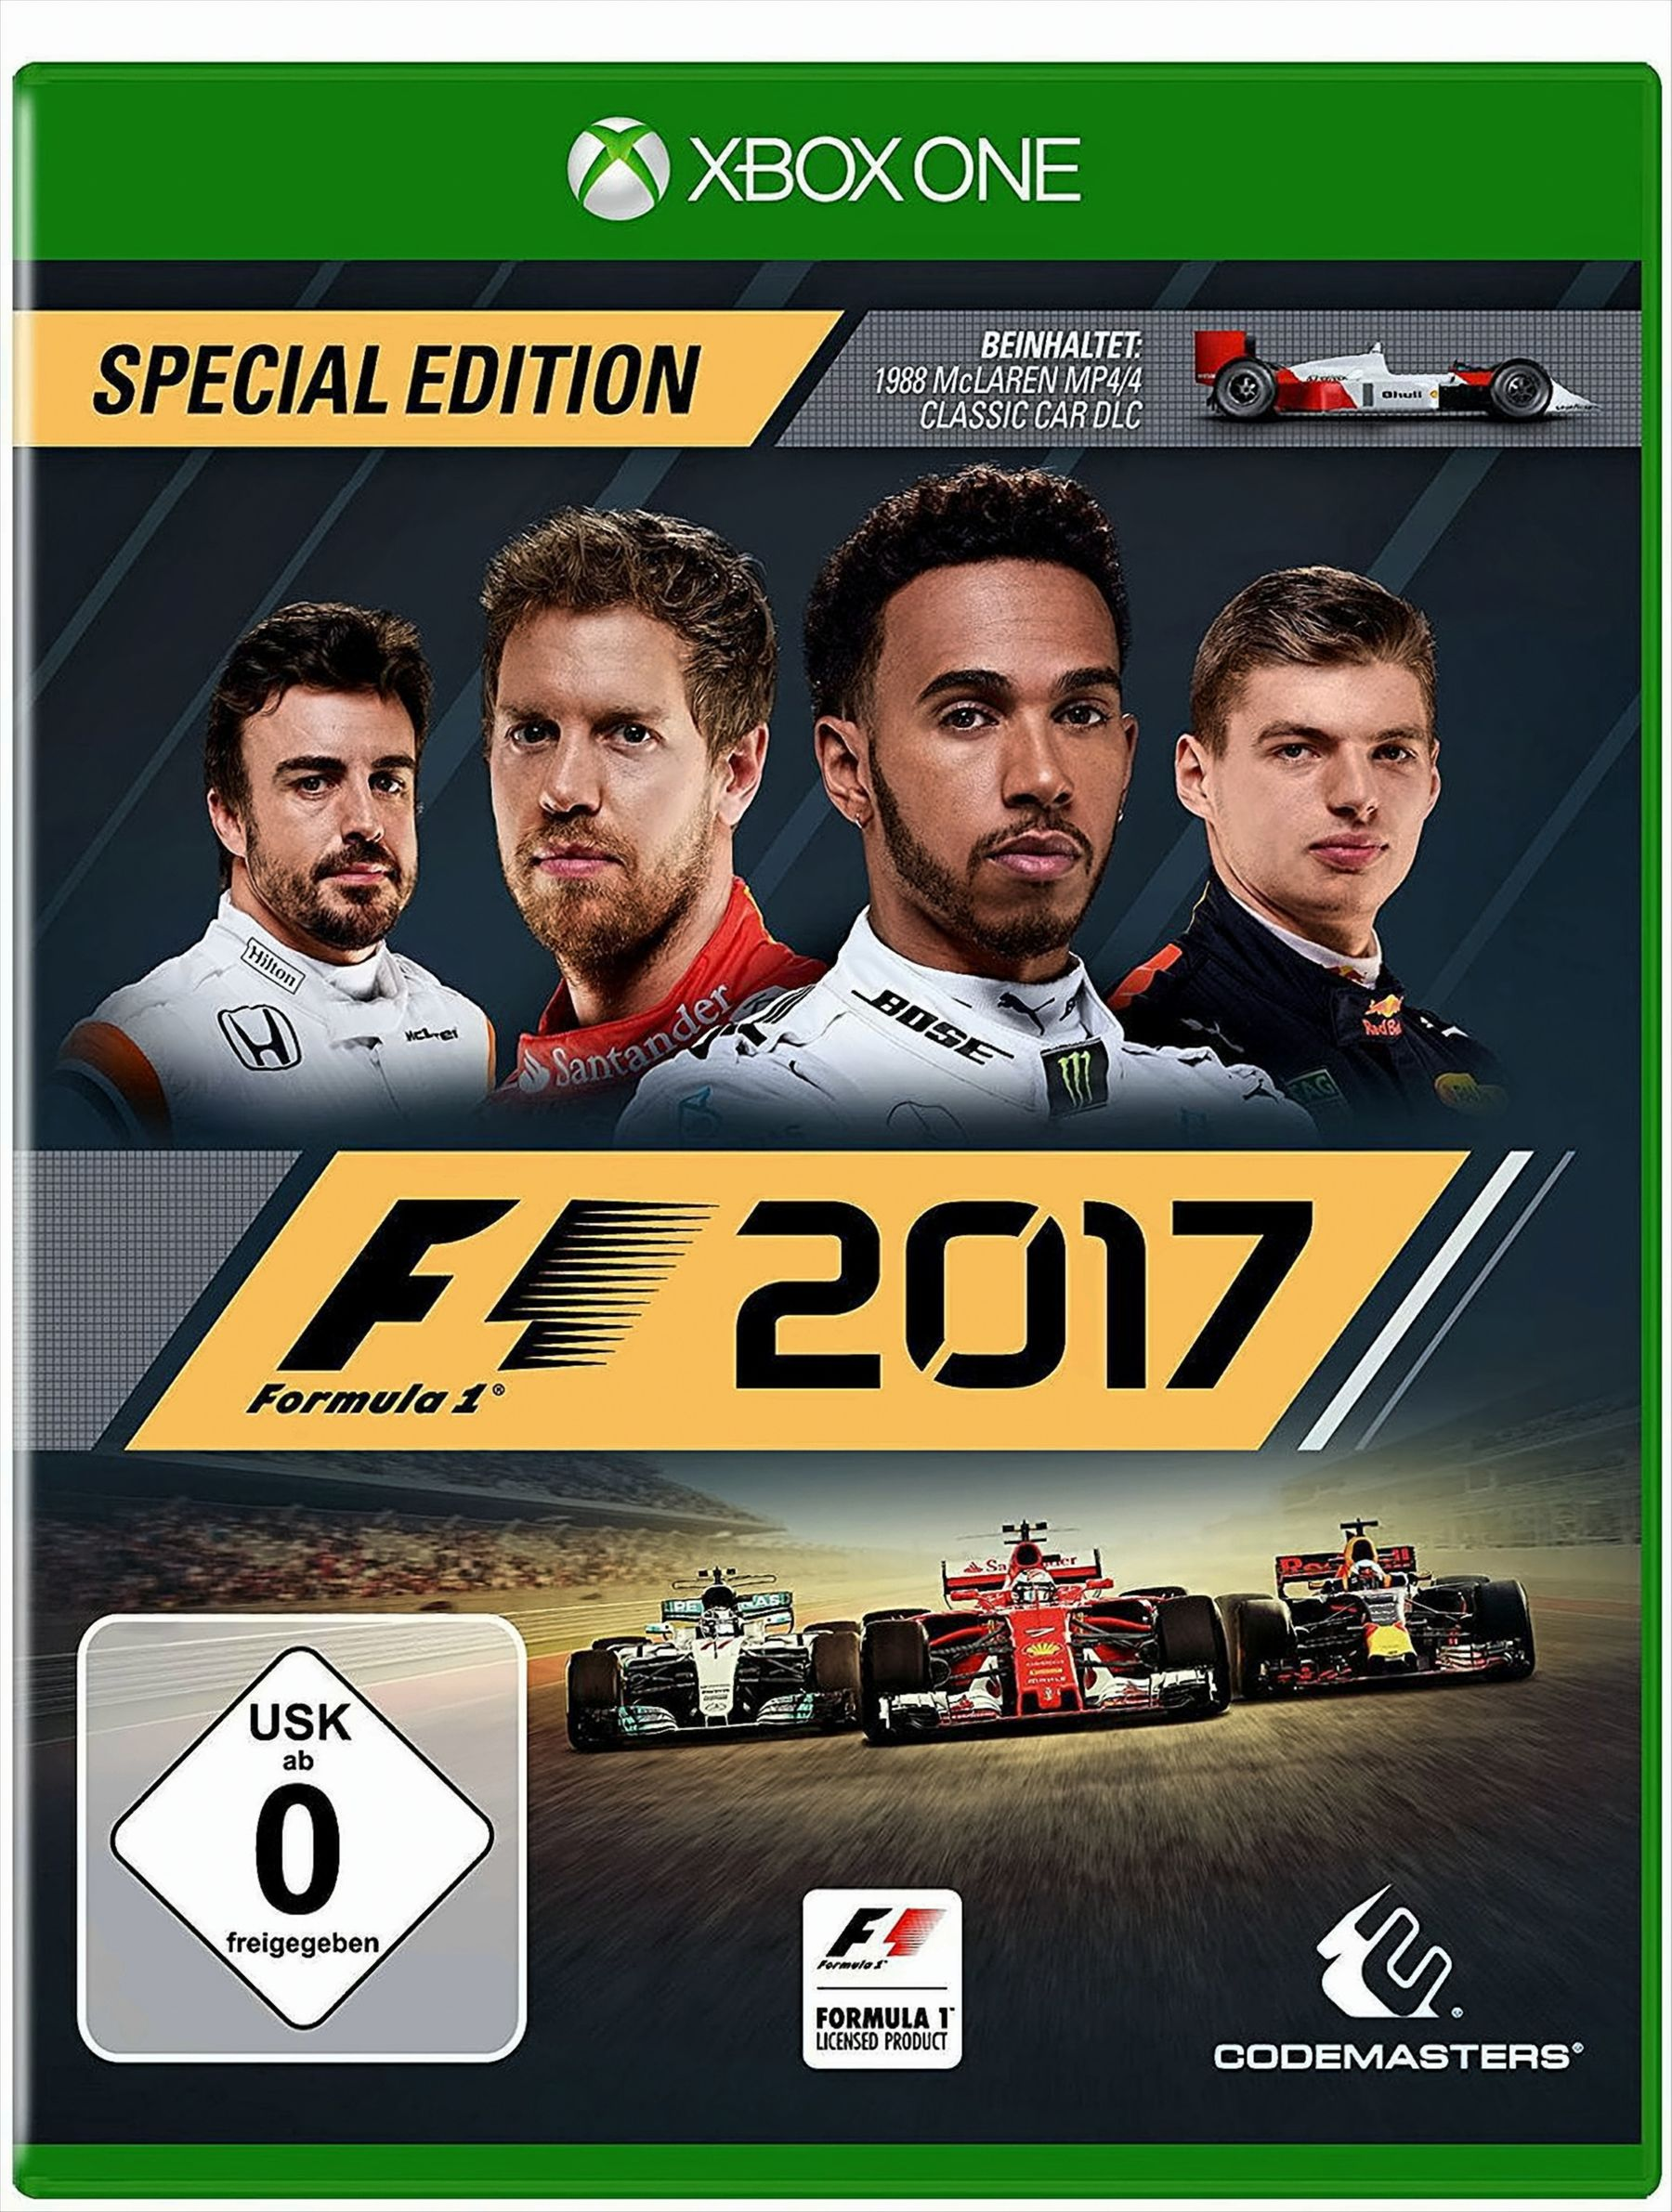 [Xbox F1 - Special Edition One] - 2017